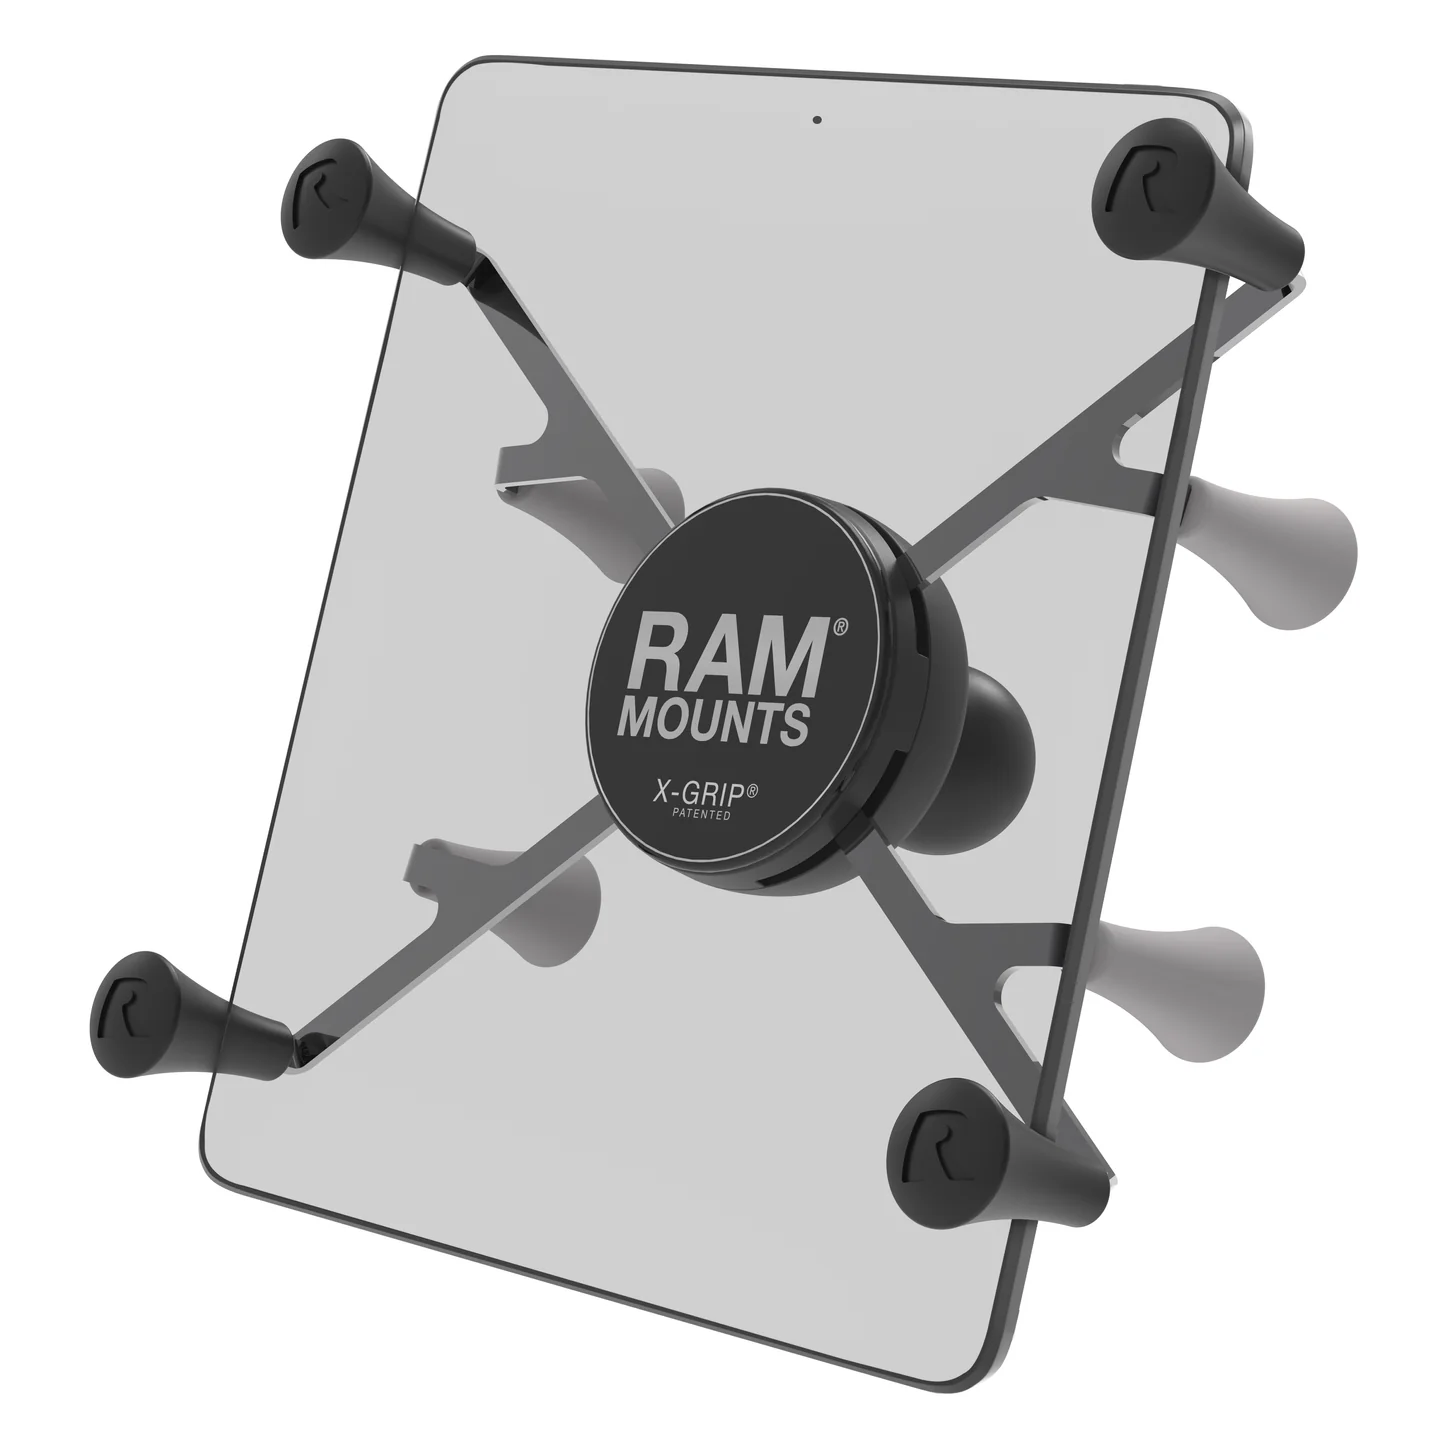 ram-x-grip-universal-holder-for-7-8-tablets-with-ball-b-size